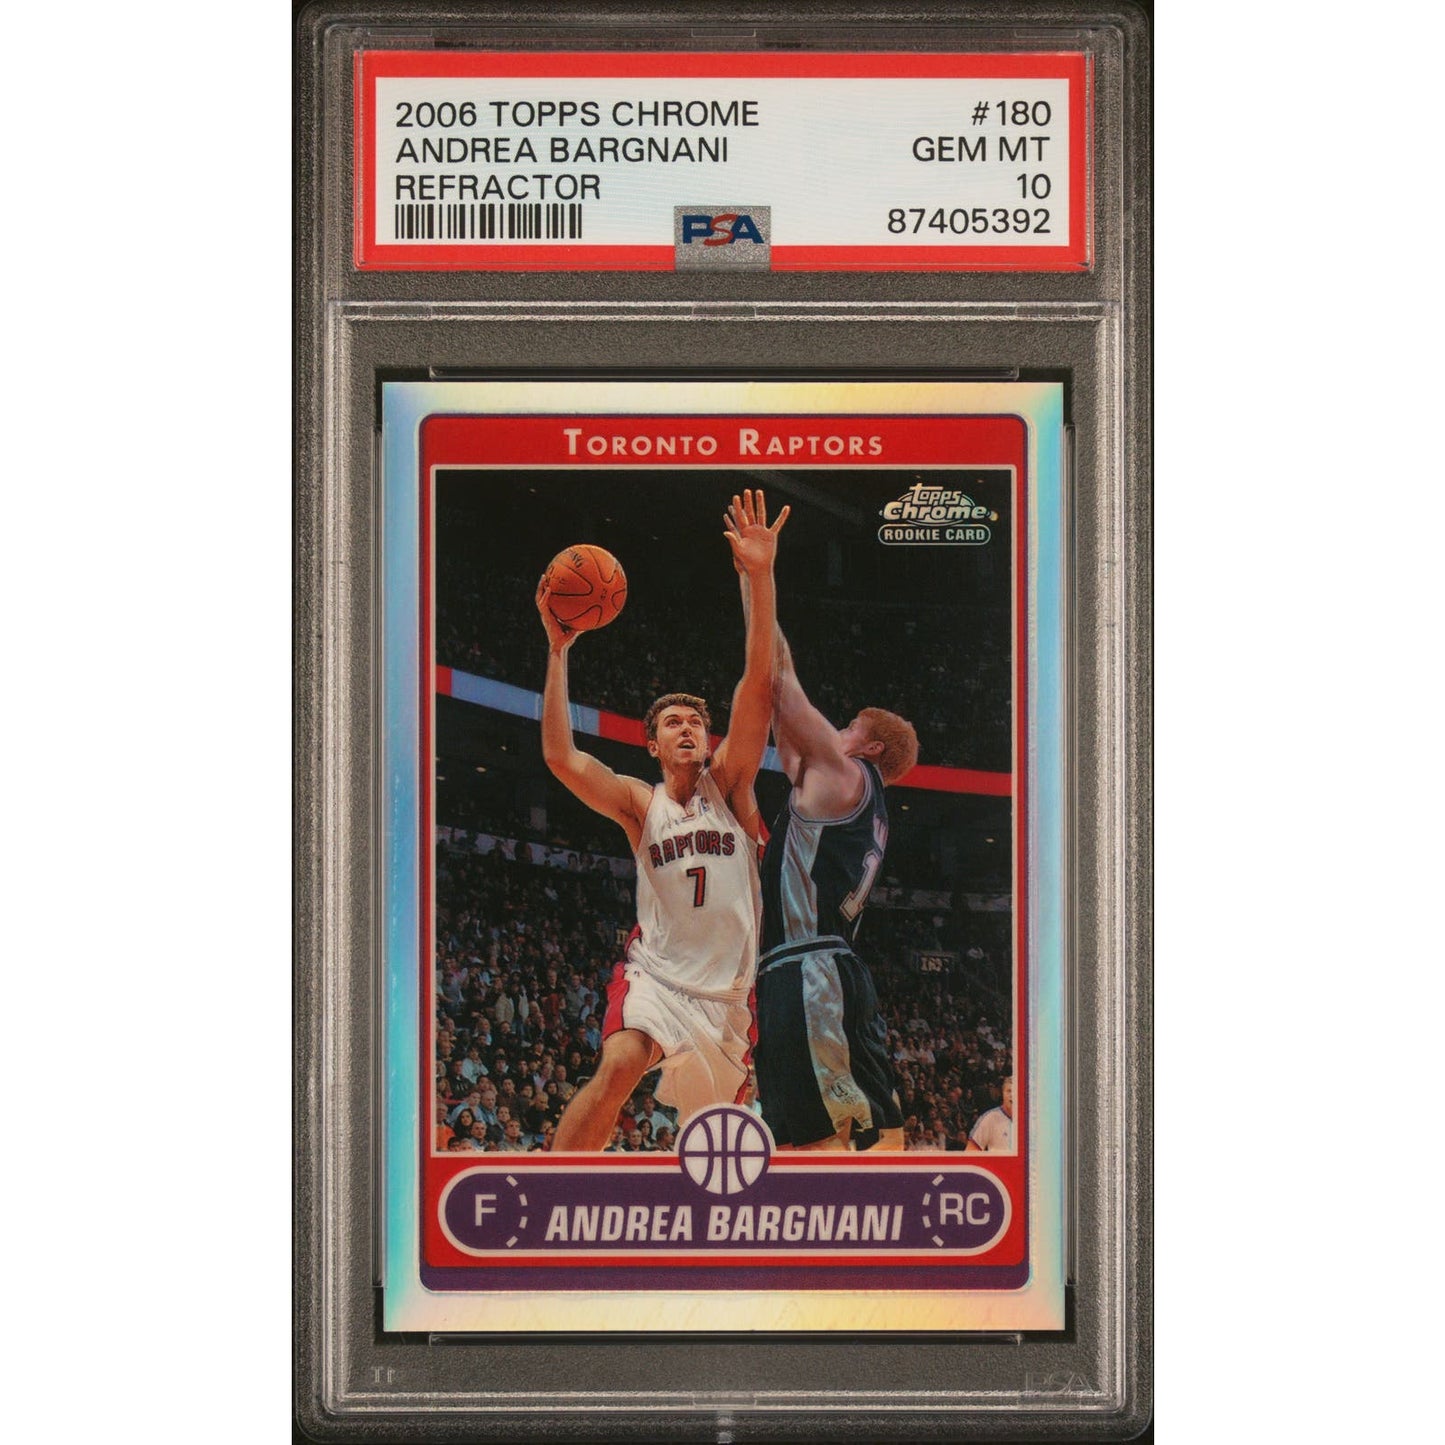 2006-07 TOPPS CHROME ANDREA BARGNANI #180 REFRACTOR RC /199 PSA 10